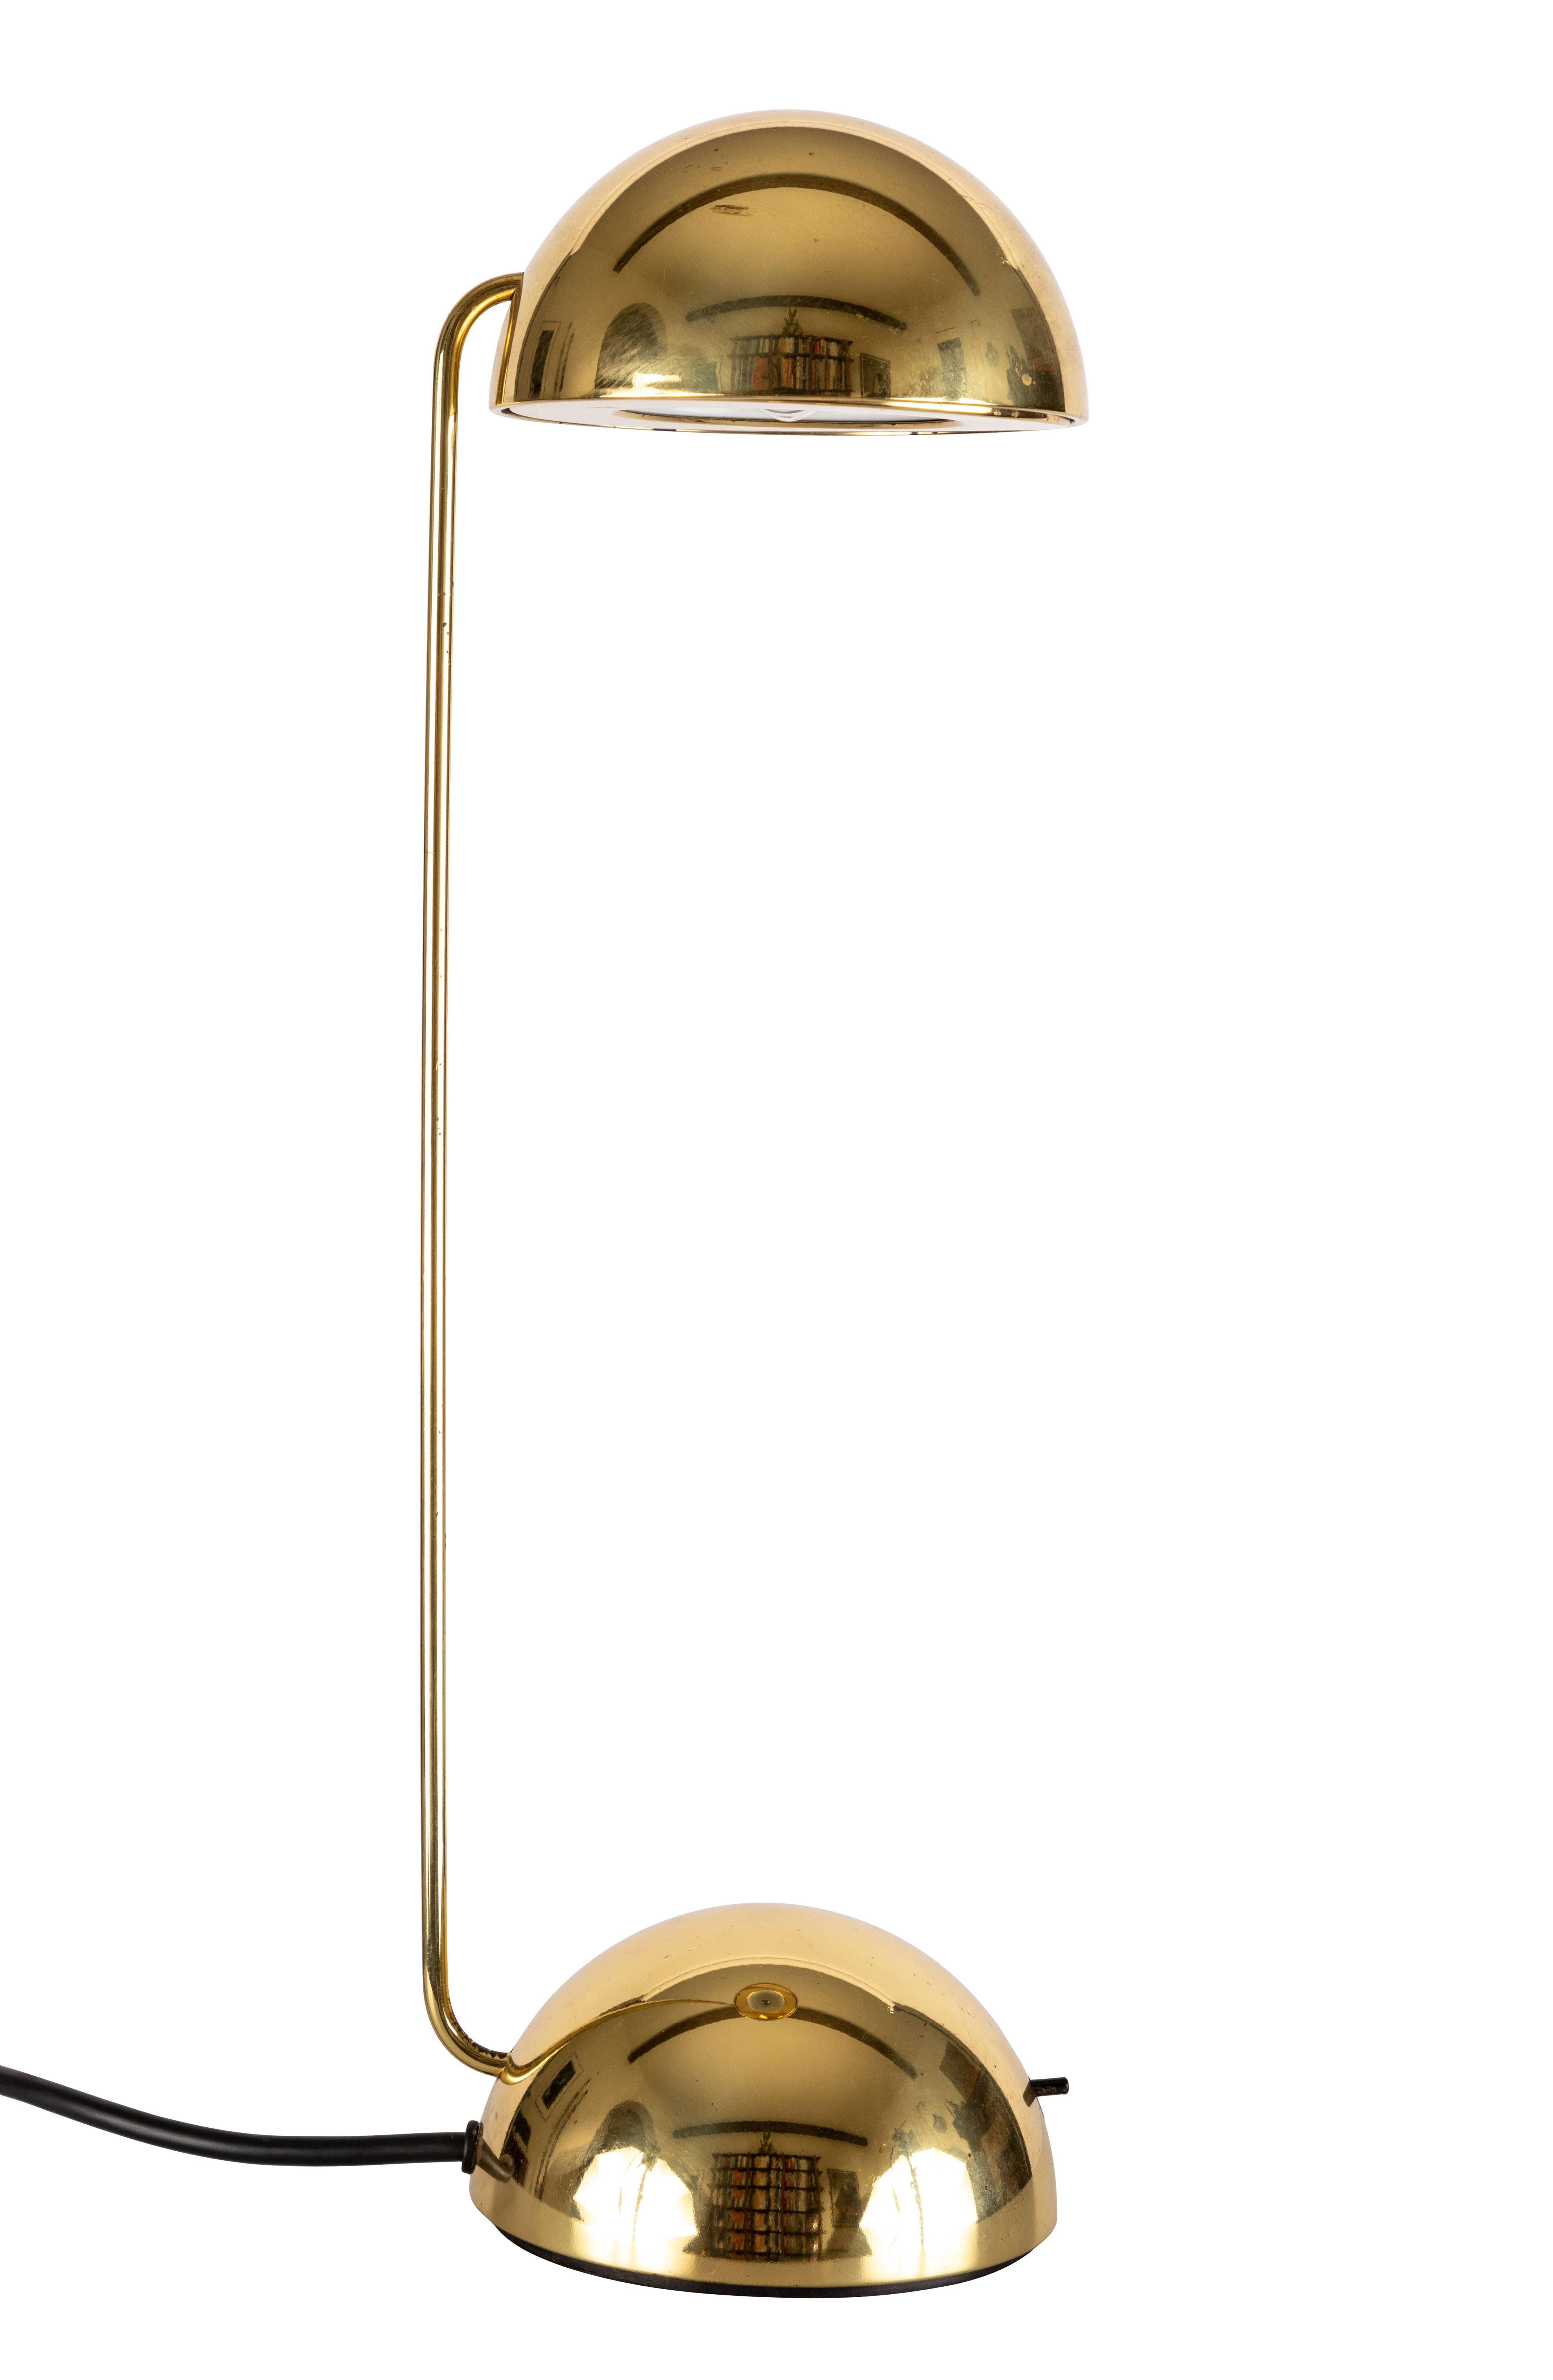 Pair of 1980s Barbieri & Marianelli Brass 'Bikini' Table Lamps for Tronconi. Executed in brass and metal. A surprisingly simple and refined design for its time, these highly adjustable lamps can be rotated into a number of positions for versatile